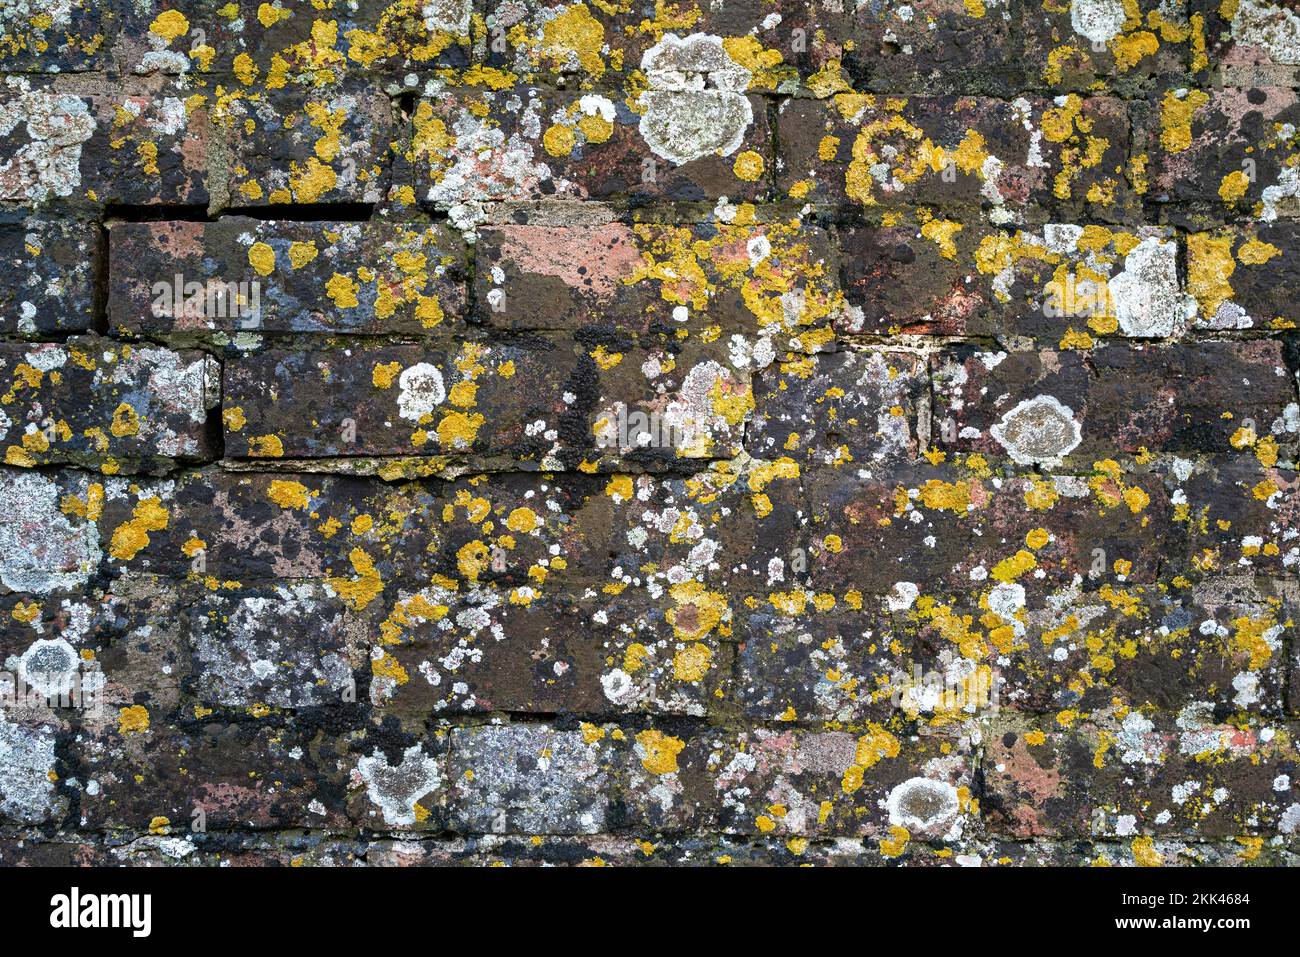 Background of old red bricks with areas of moss and saxicolous, crustose varieties of grey and yellow lichen, Xanthoria parietina. Stock Photo